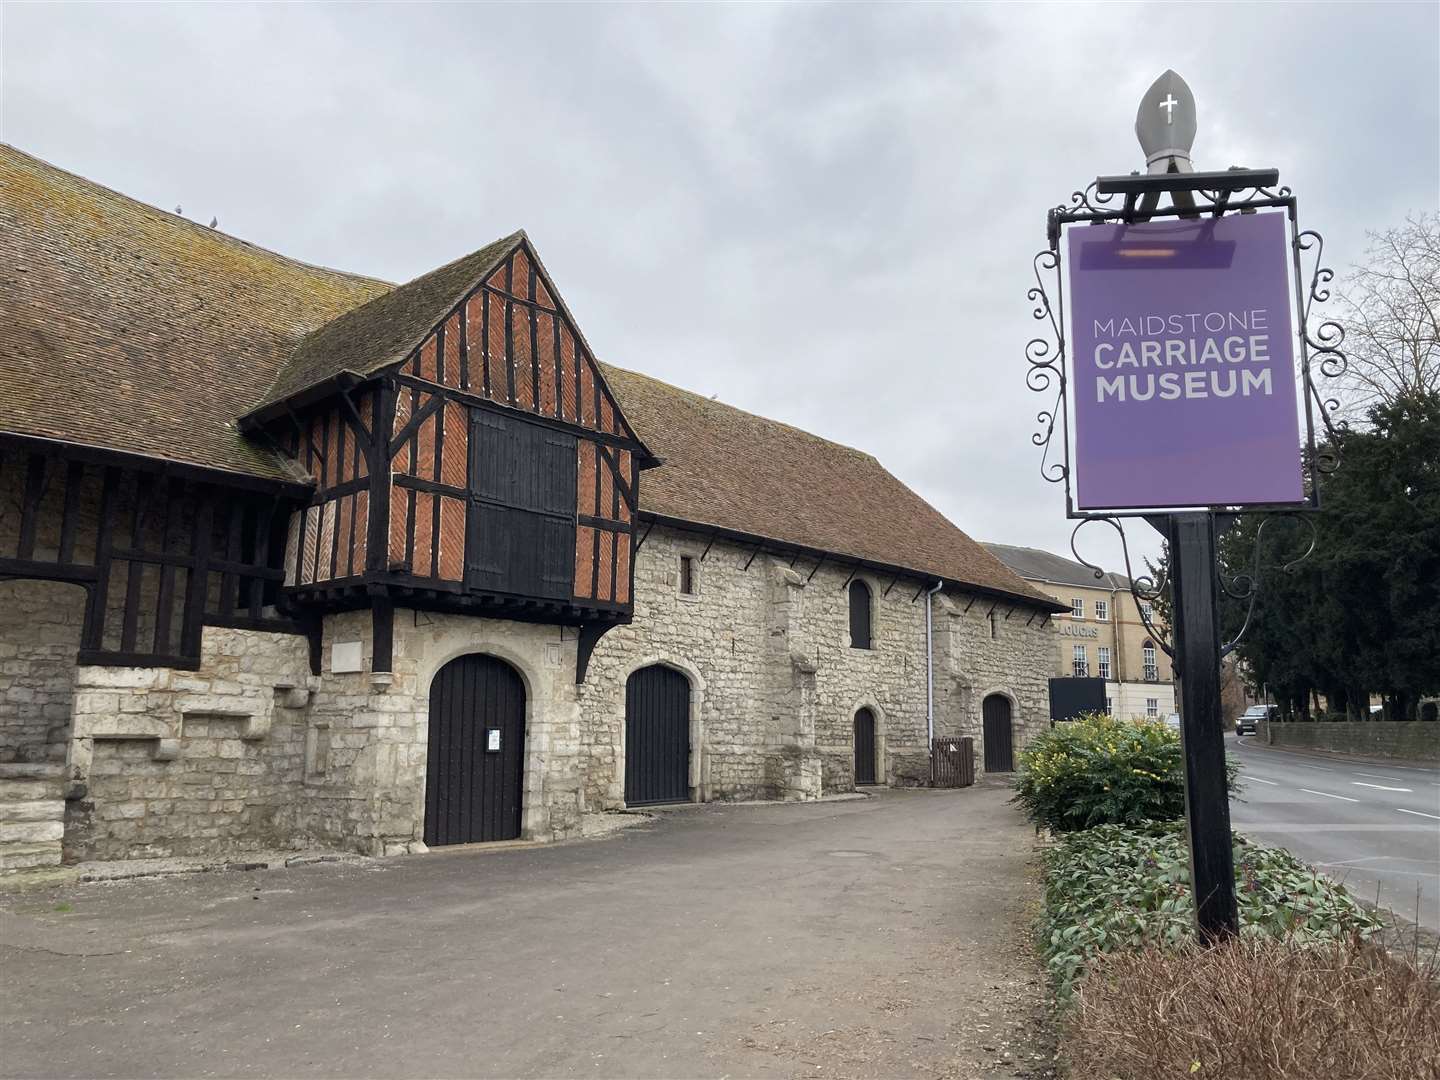 The Maidstone Carriage Museum has closed to drop-in visitors